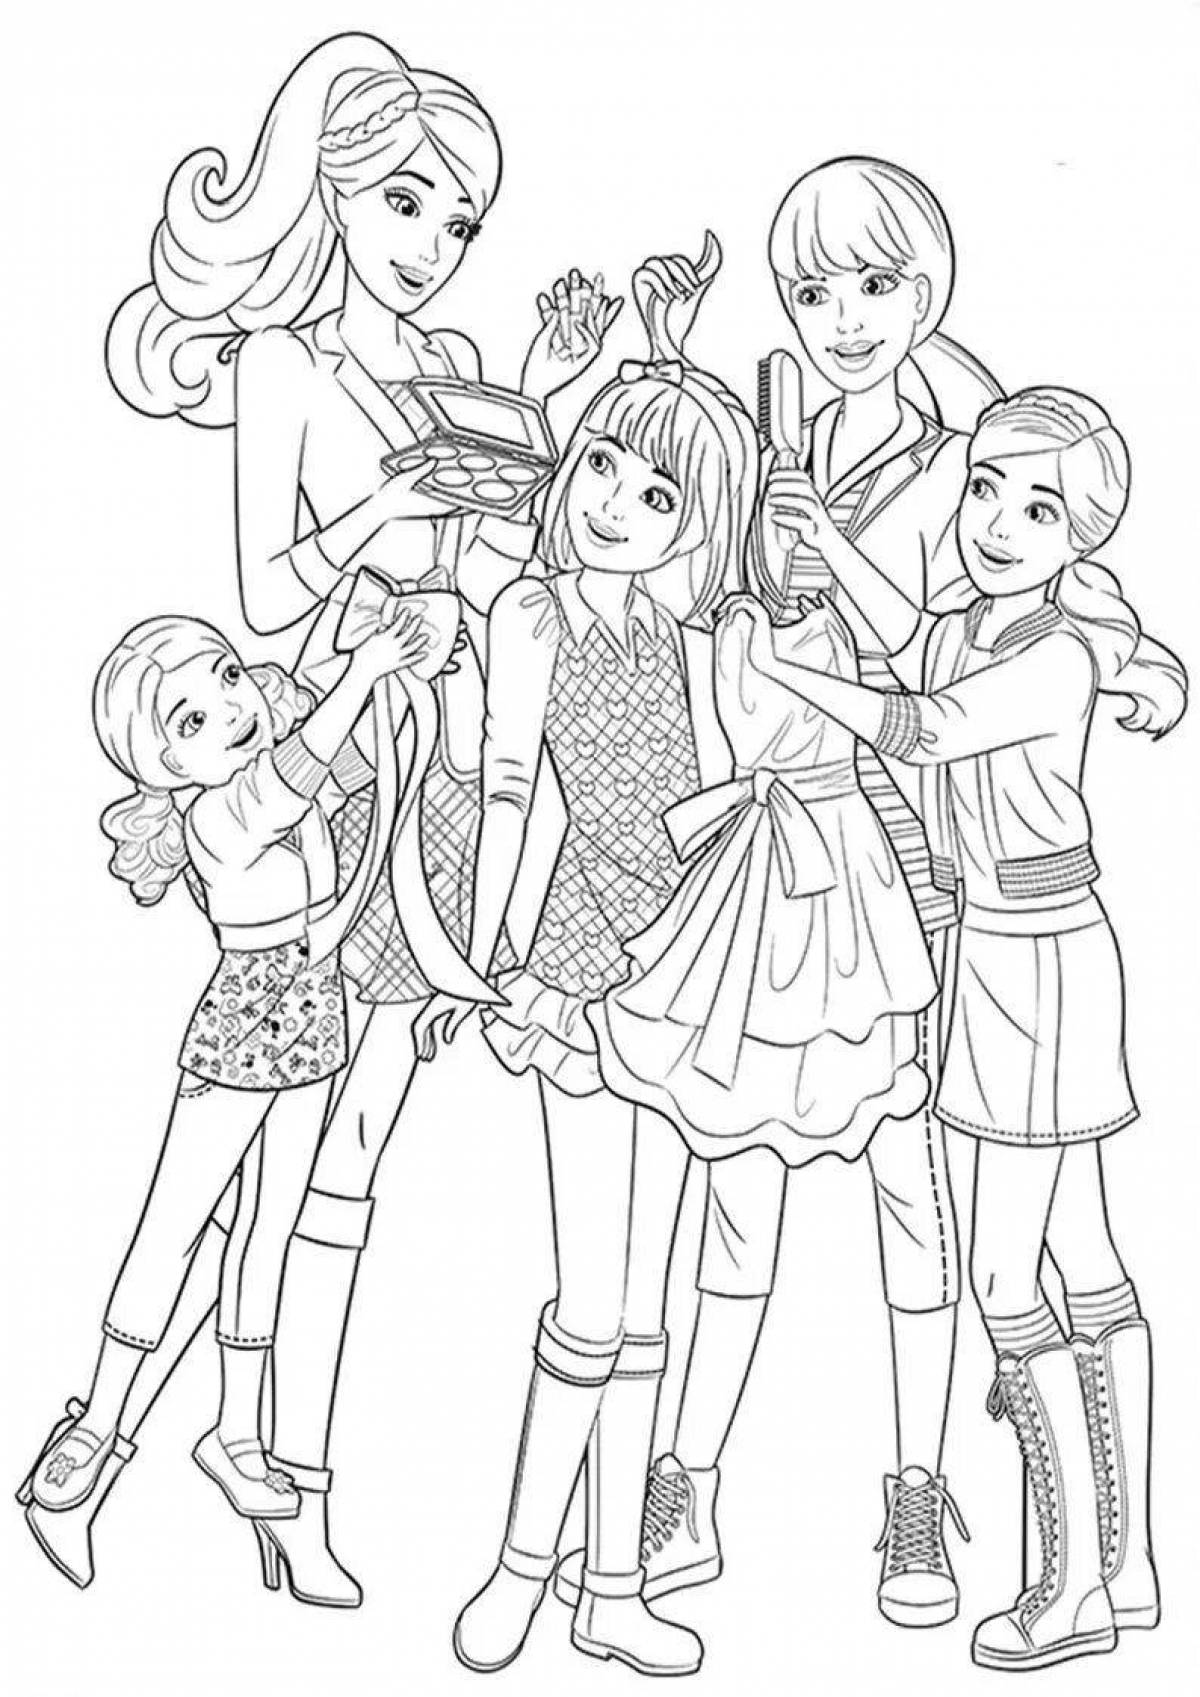 Glitter family coloring book for girls